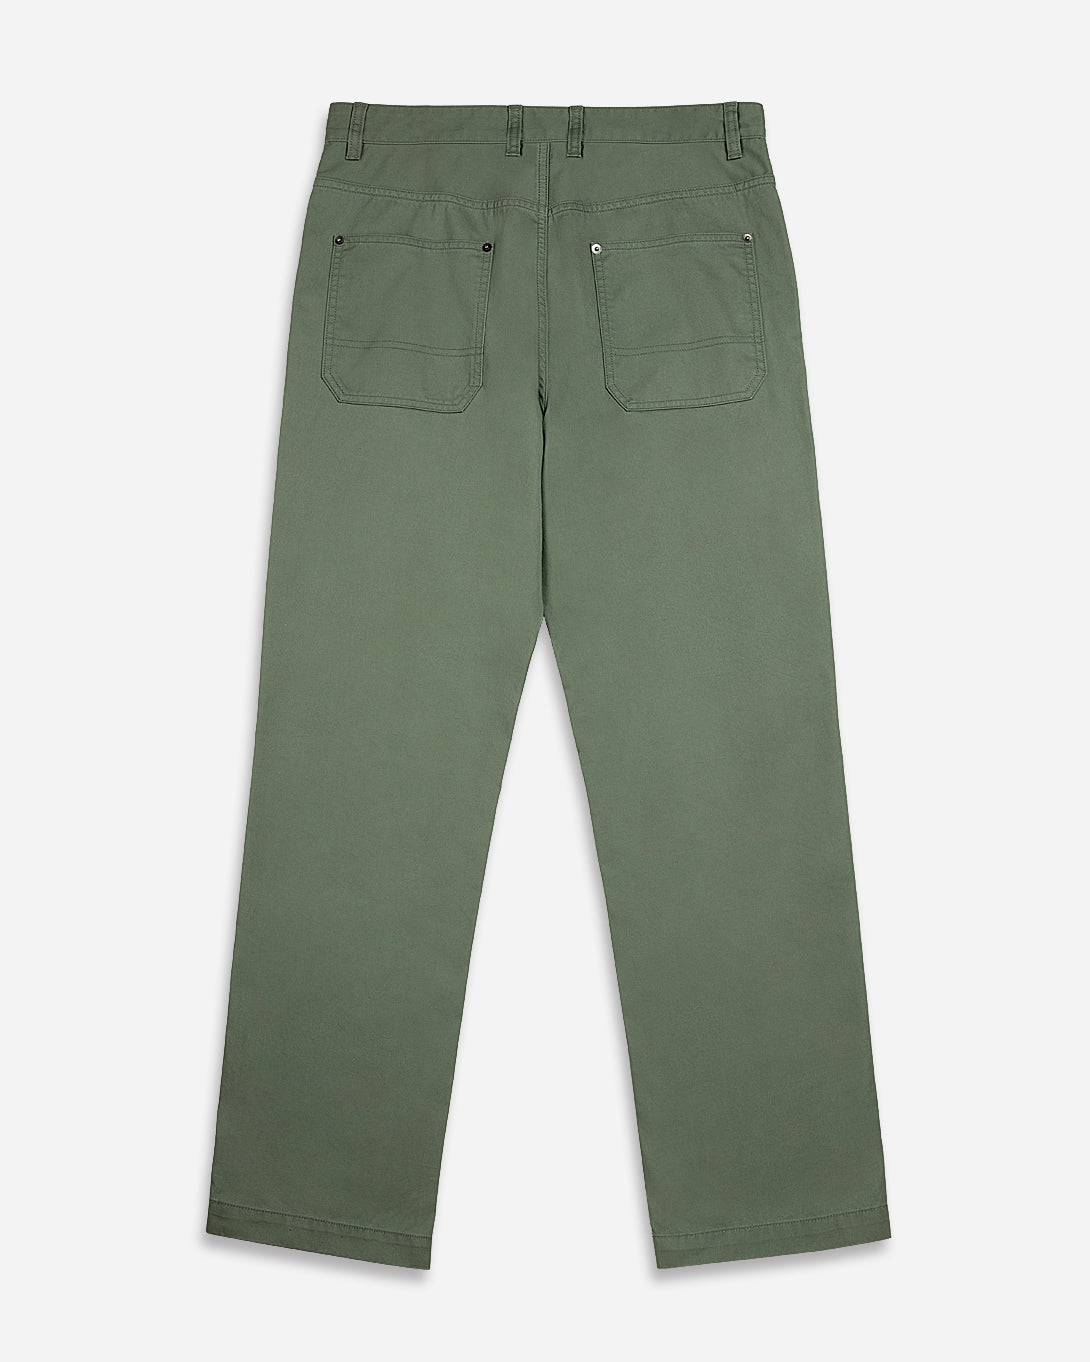 Agave Green Crosby Patch Pants Mens Worker Structured Lightweight Patched